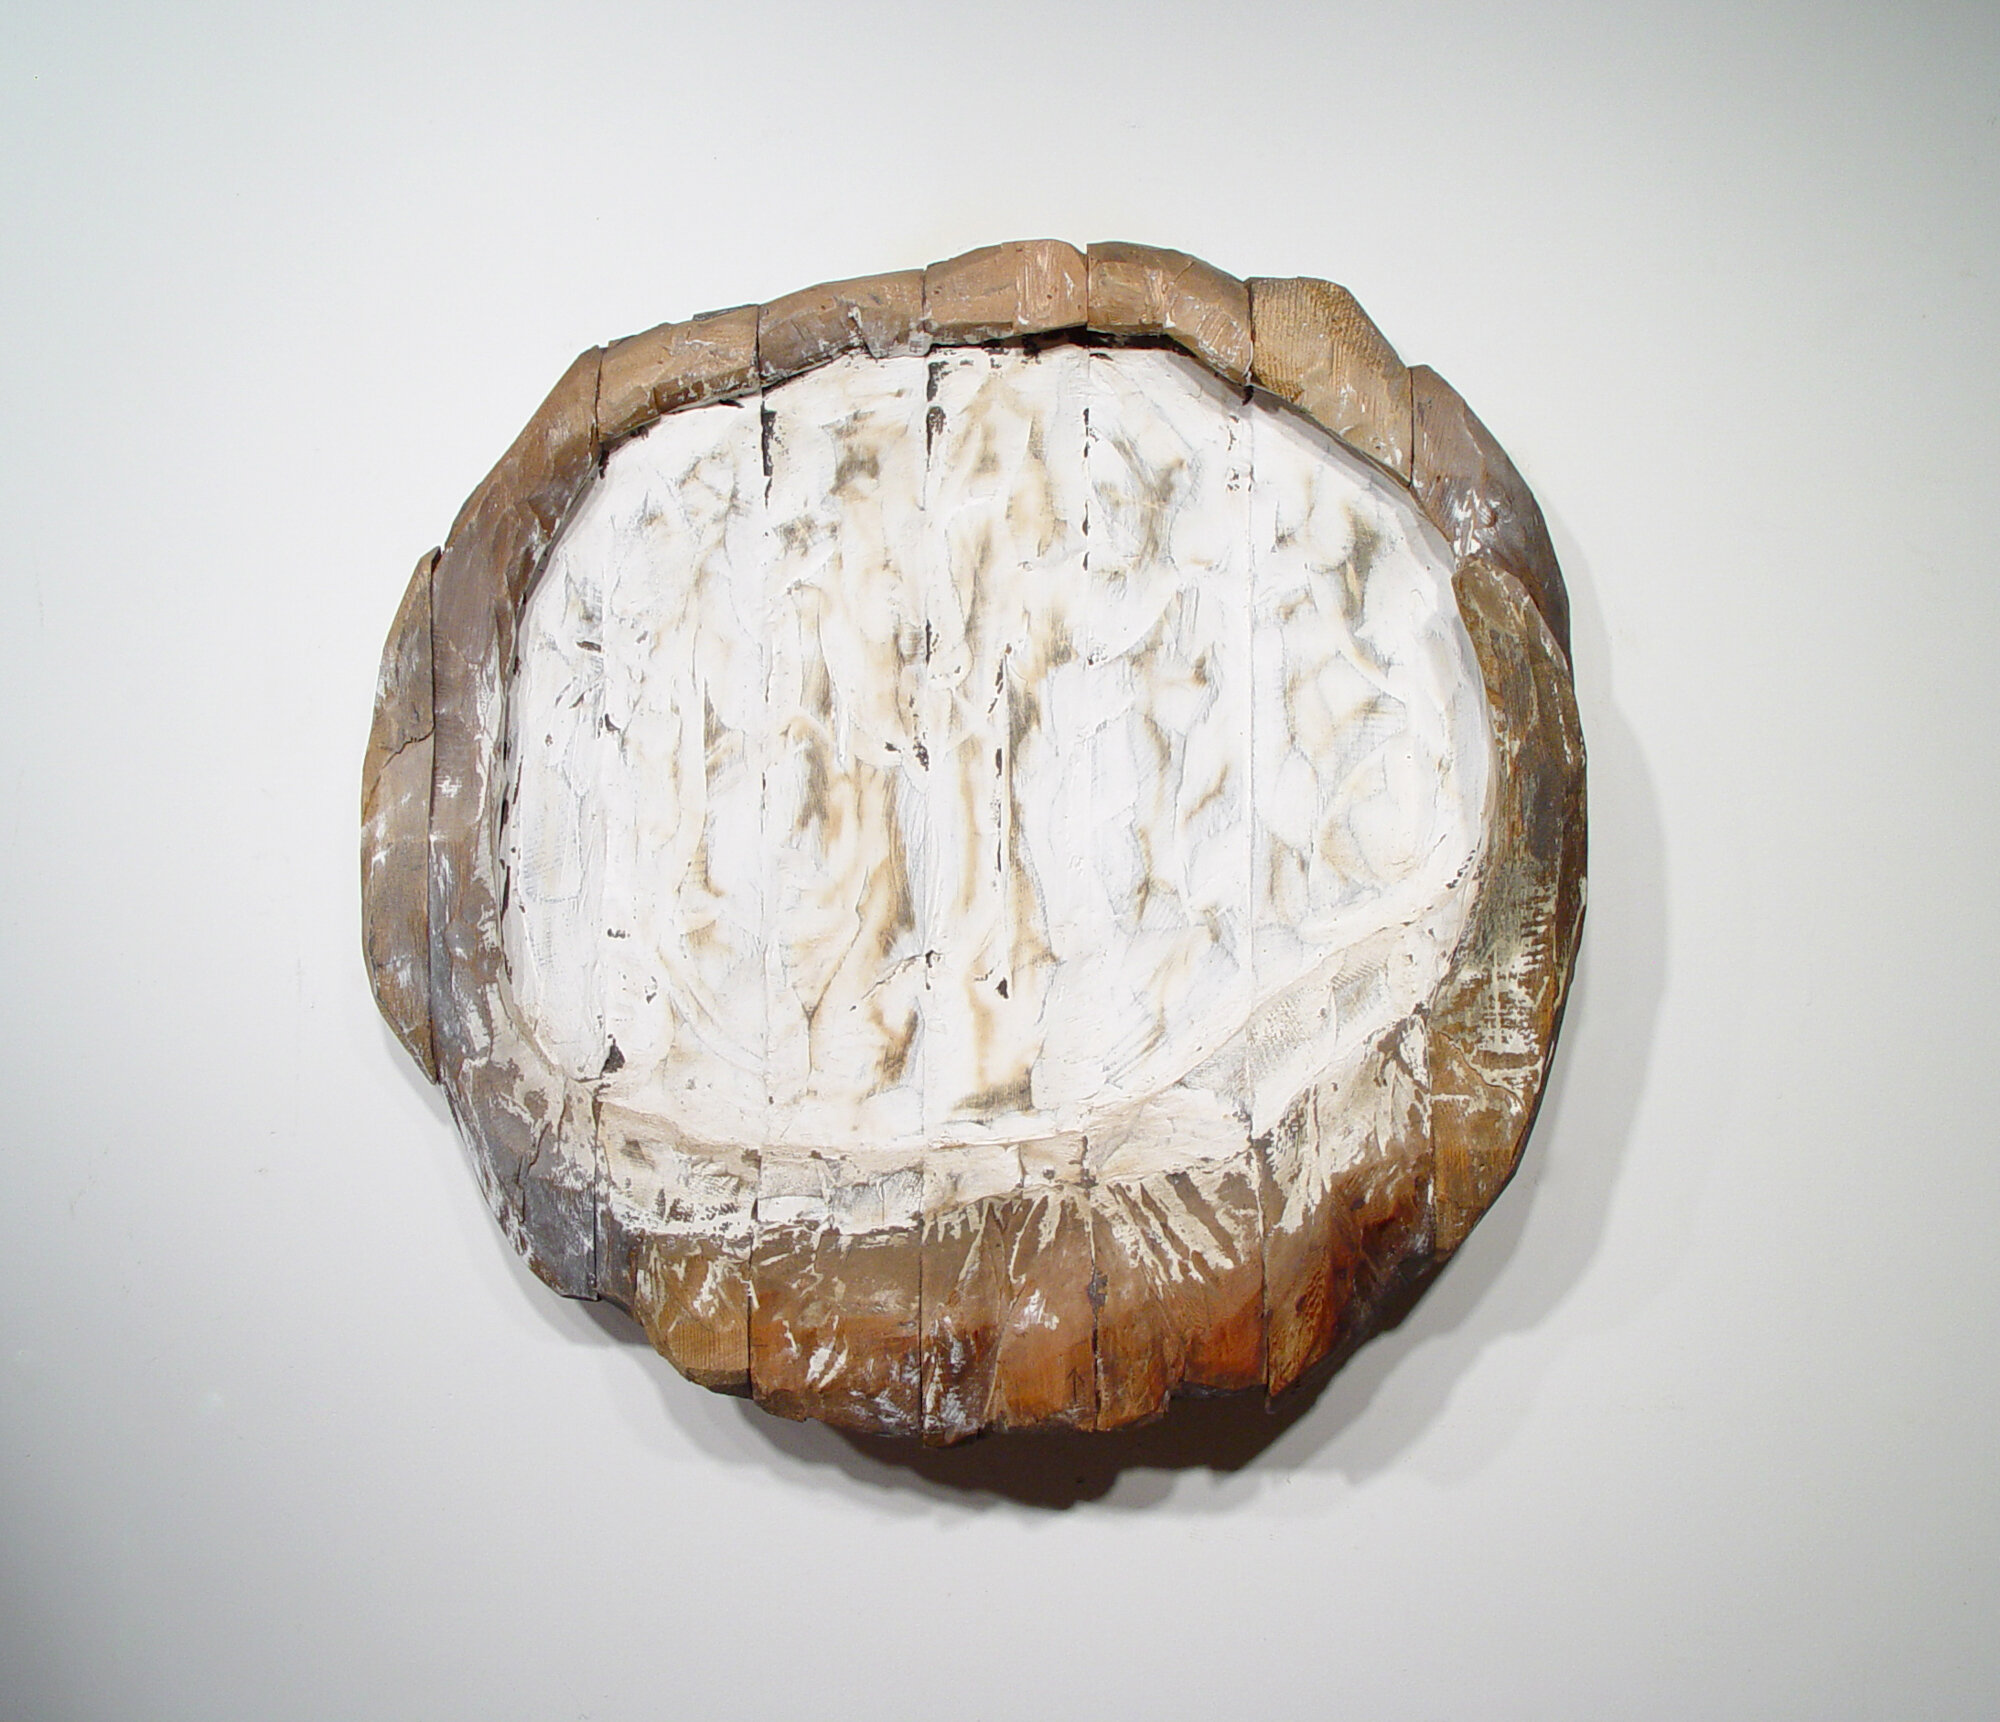       Dwa (two) , 2008 Cedar, plaster, and ink 26 x 26 x 5 in.    Galerie Lelong &amp; Co.  